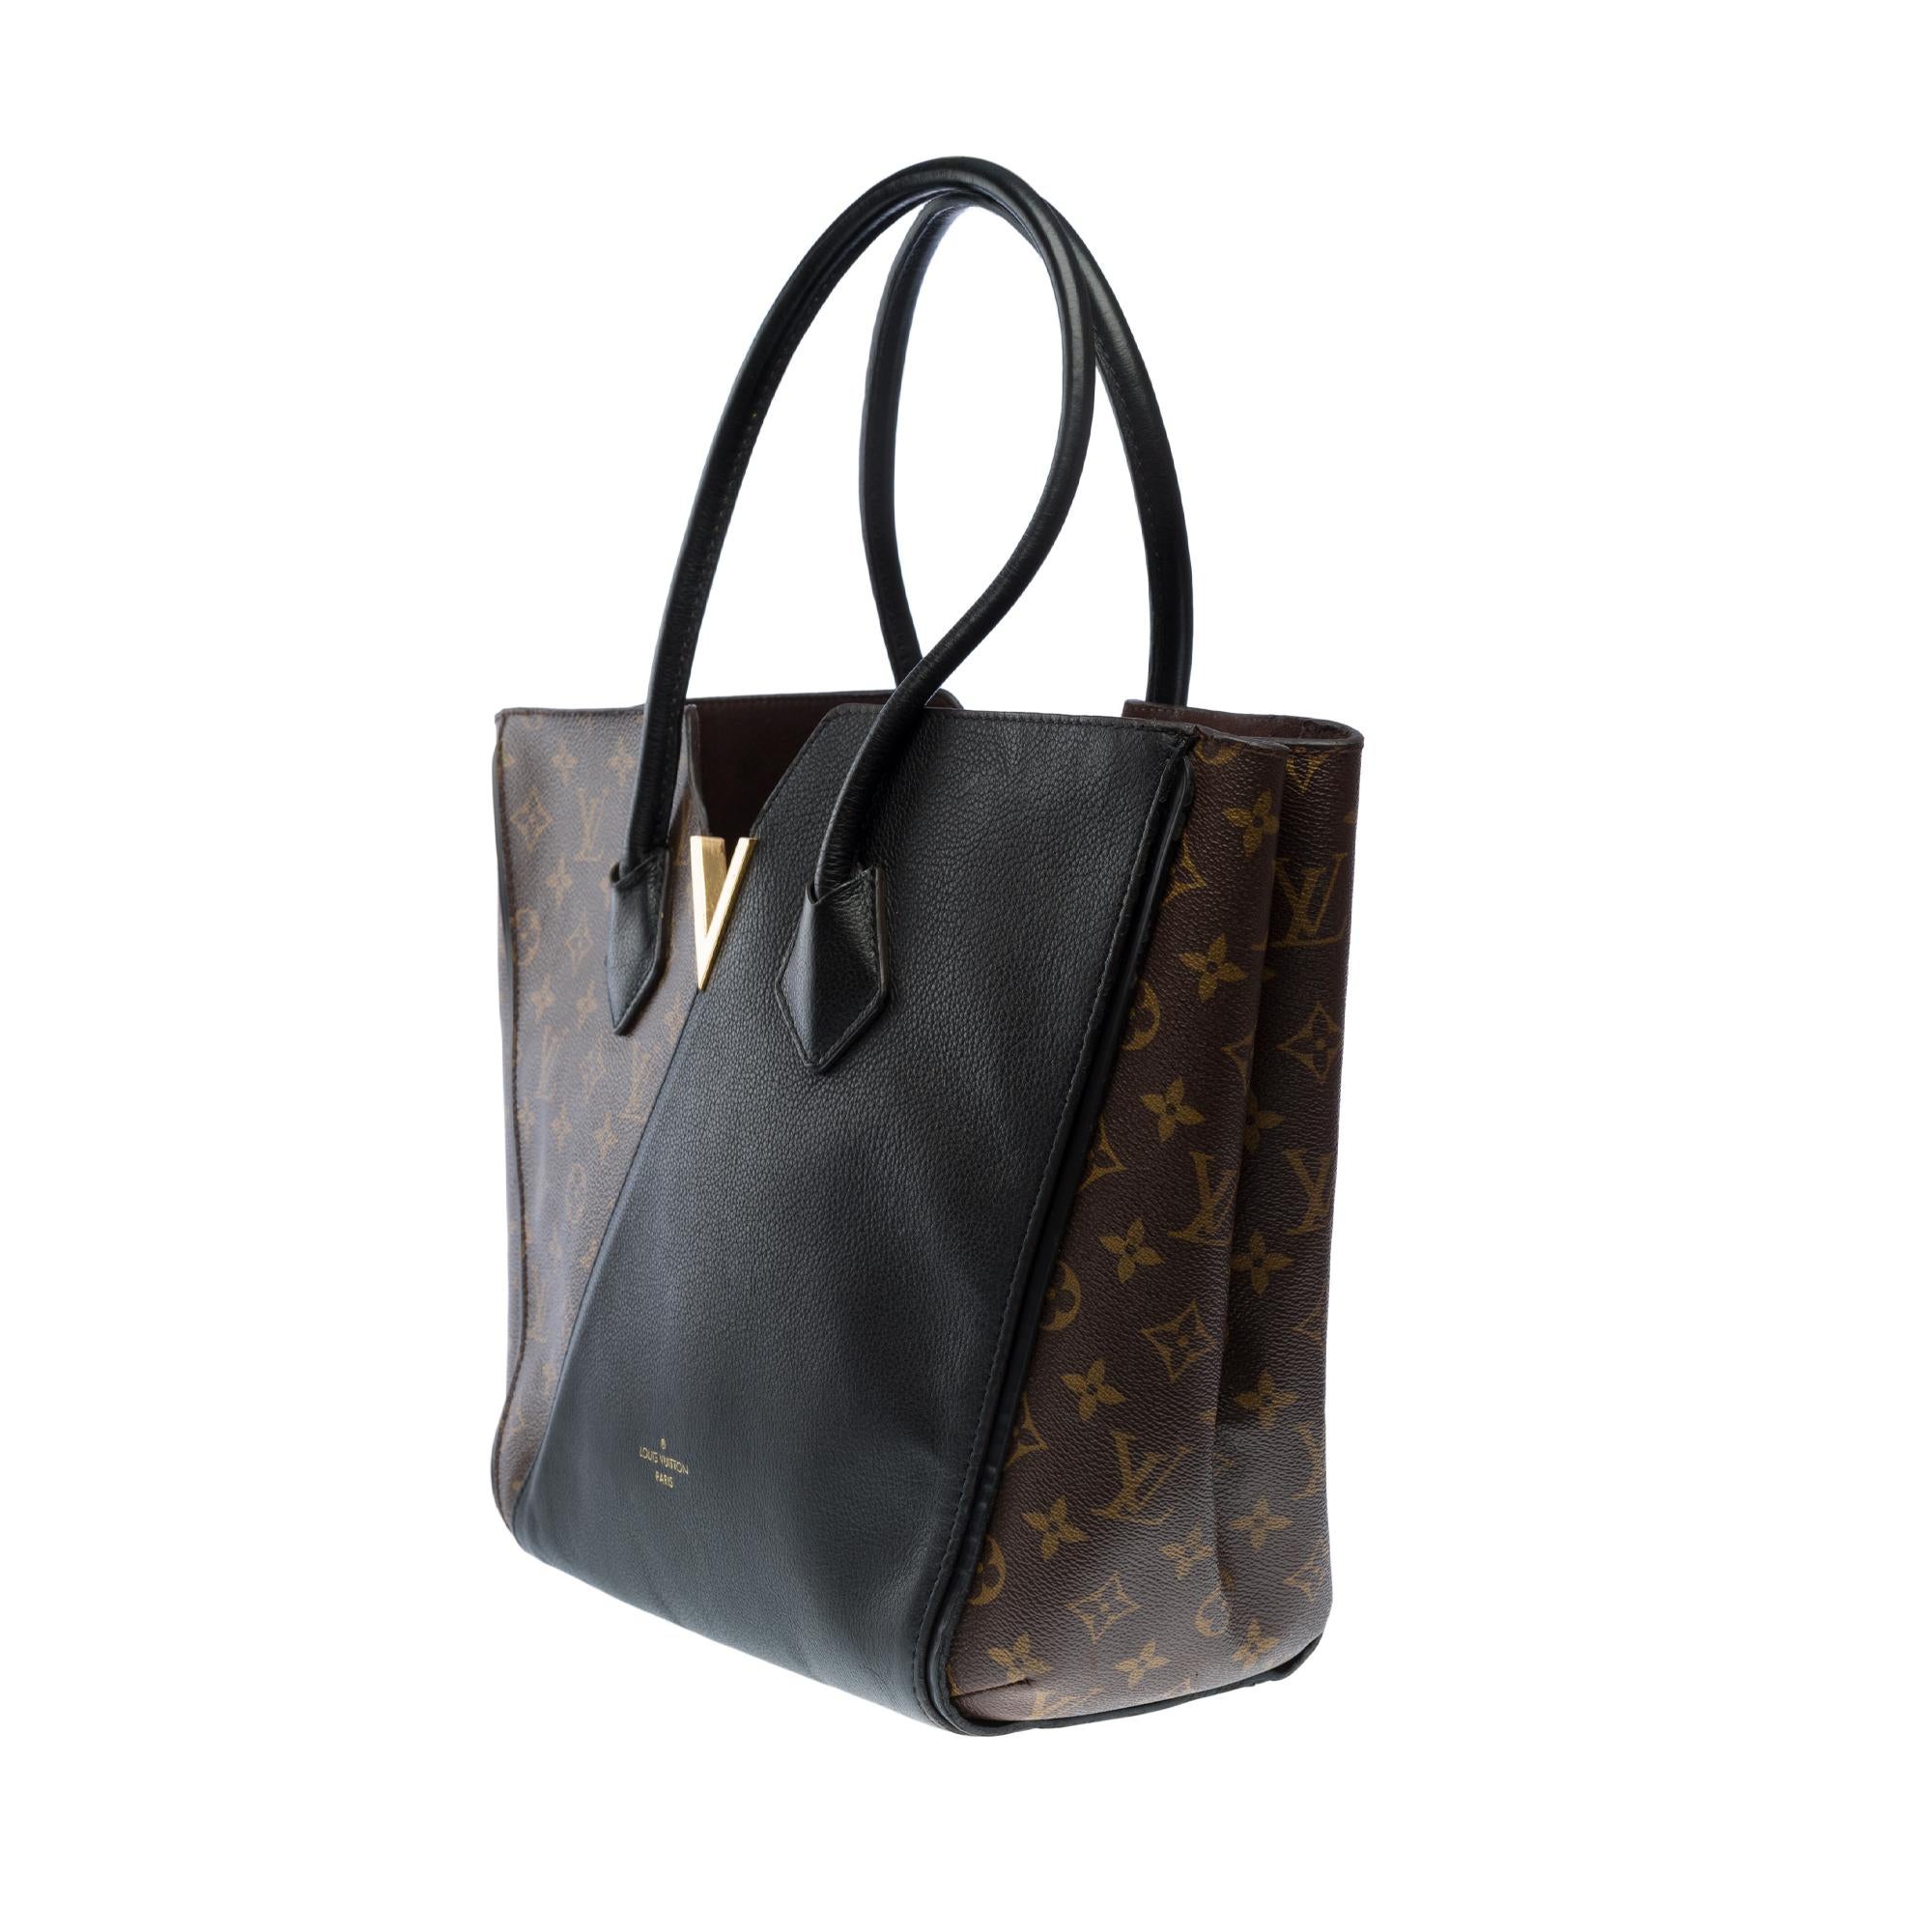 Women's Louis Vuitton Kimono Tote bag in brown monogram canvas and black leather, GHW For Sale